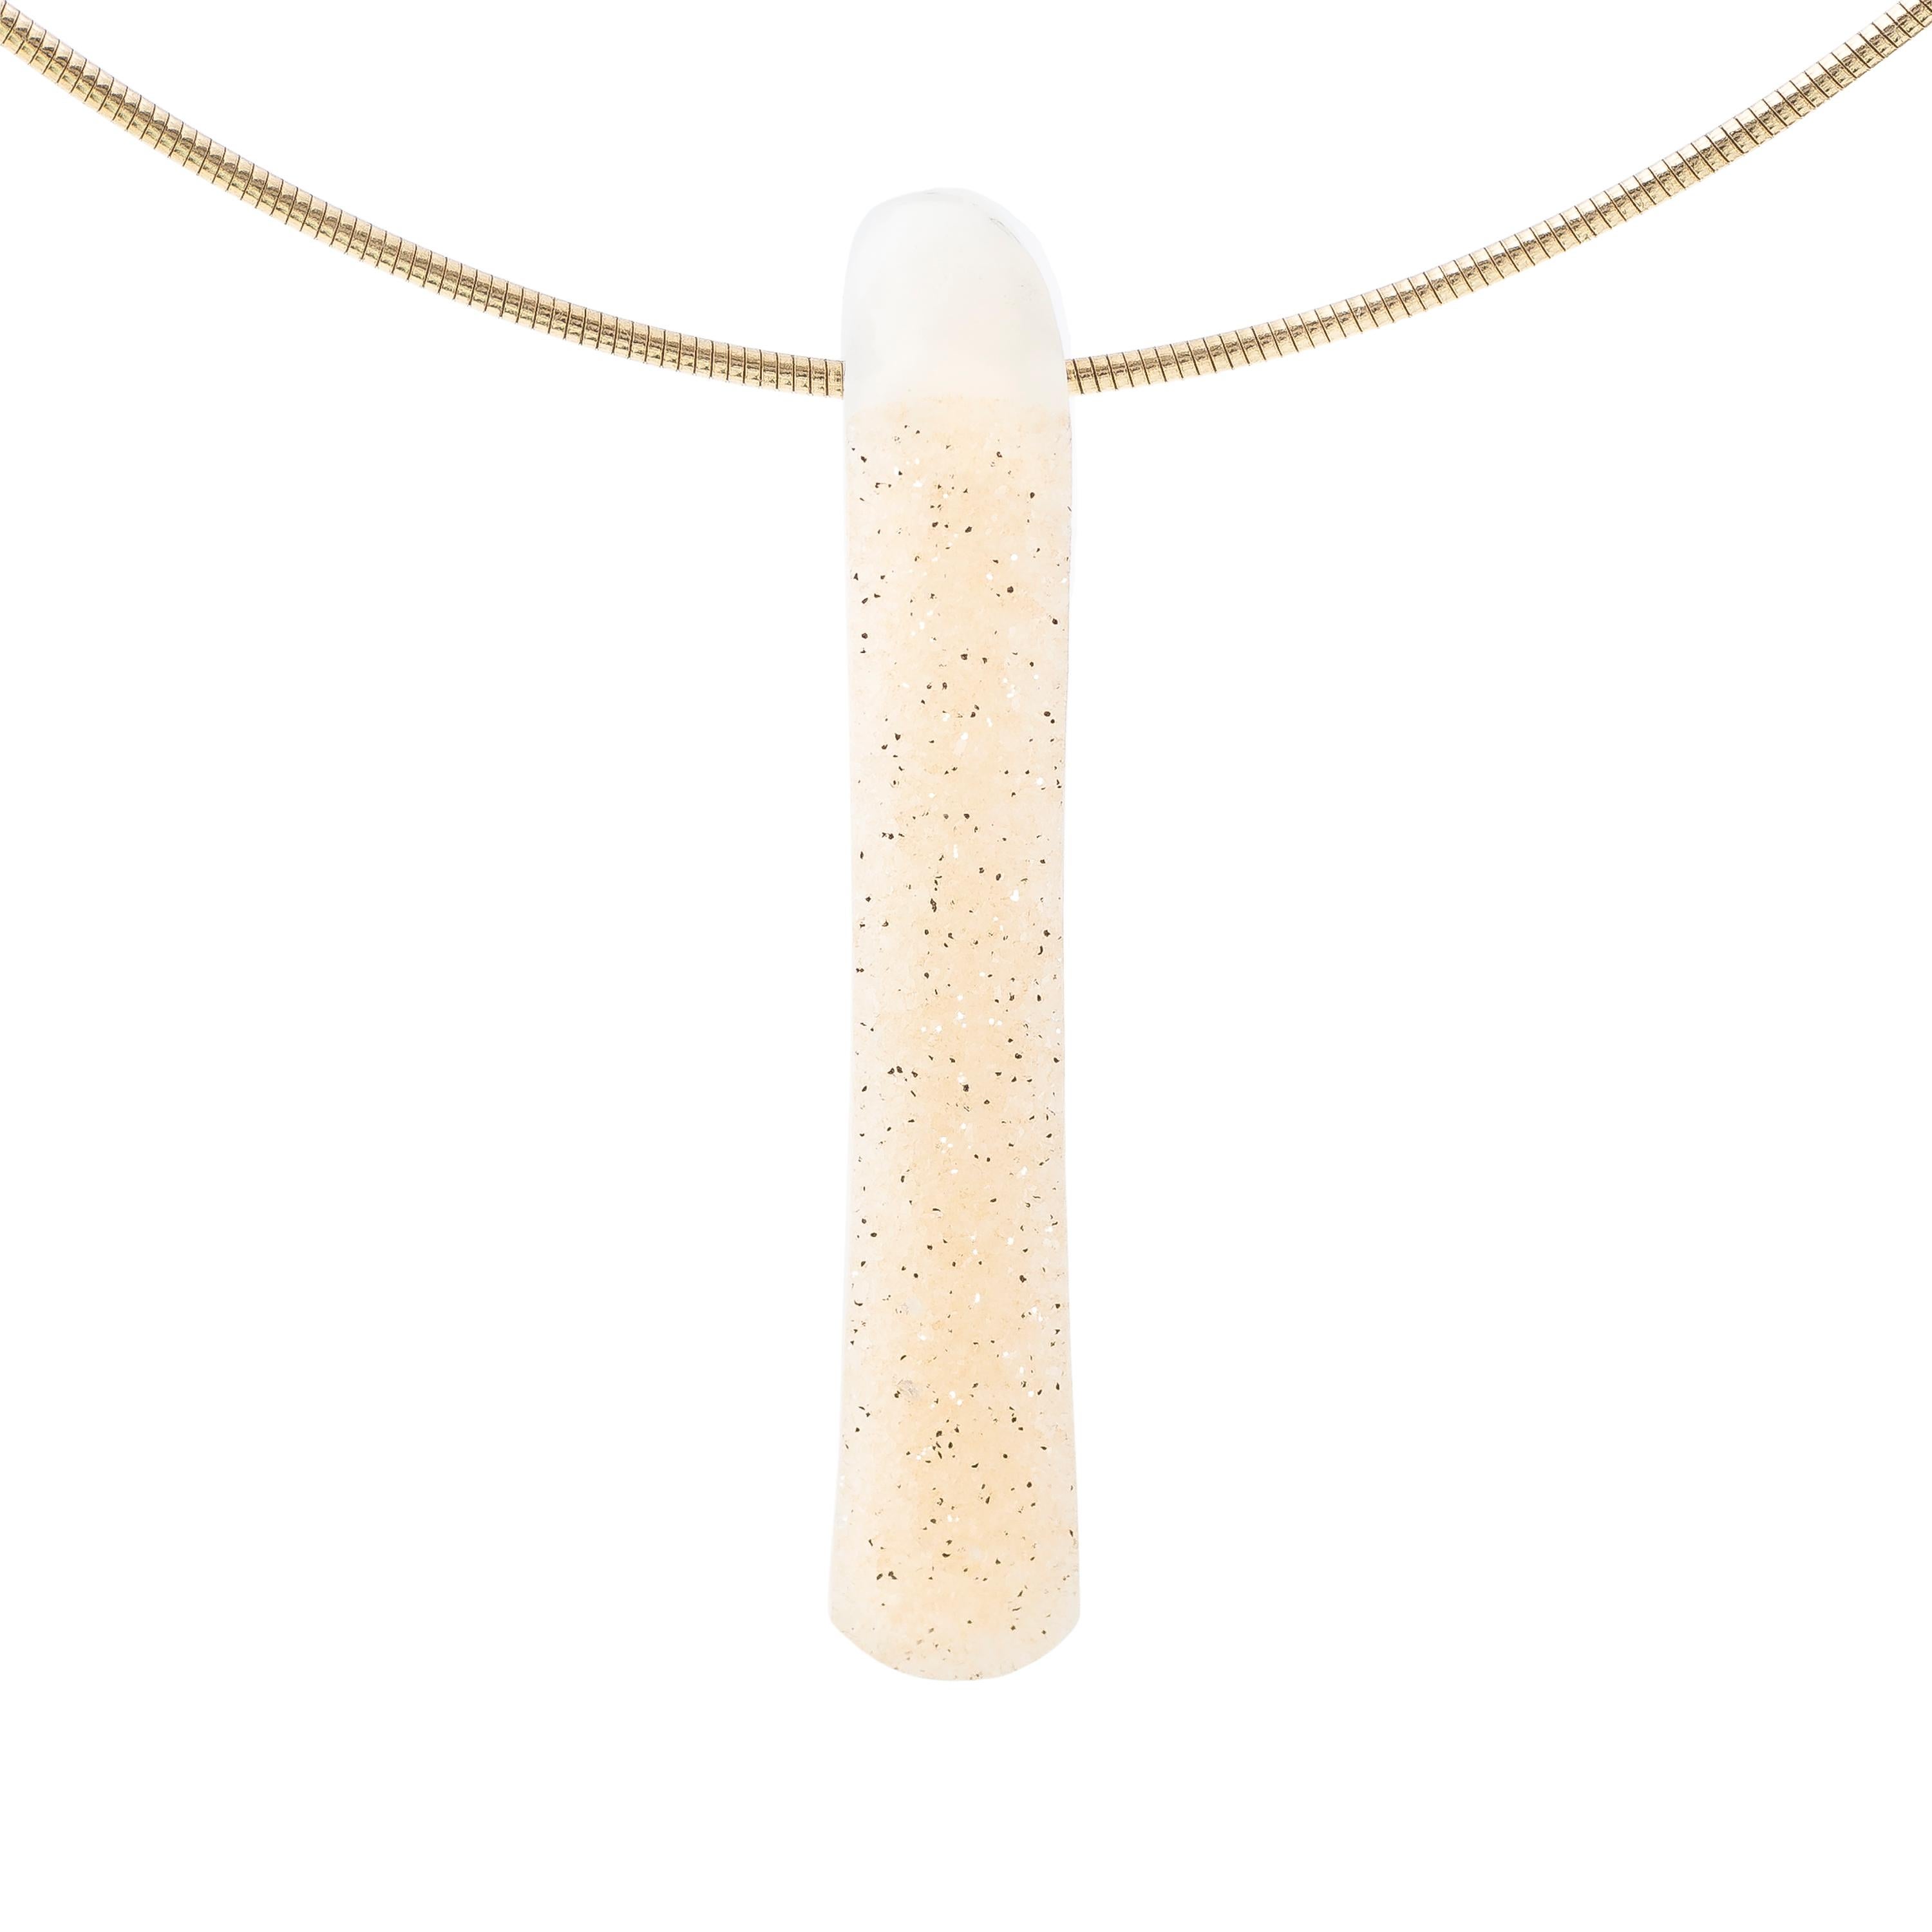 This one of a kind jewel is hand carved and signed by Dieter Lorenz. The golden Drusy pendant is made from an Agate Drusy carved into a softened rectangular shape and hung on an 18 Karat Yellow Gold circular necklace. A contemporary piece: simple,